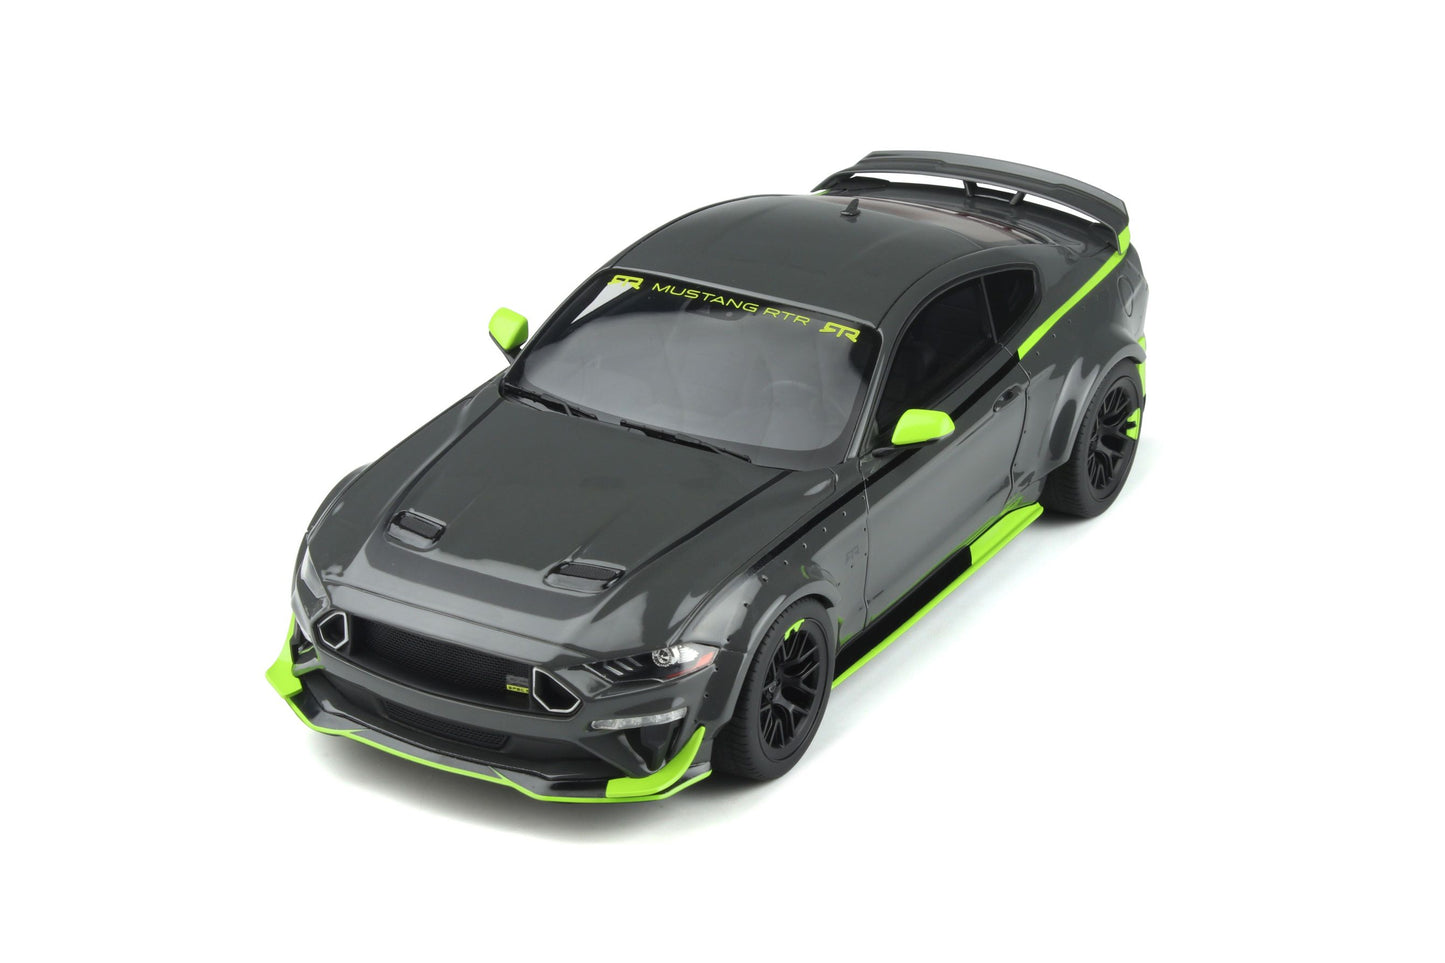 GT Spirit - Ford Mustang "RTR Spec 5 - 10th Anniversary" (Lead Foot Grey) 1:18 Scale Model Car